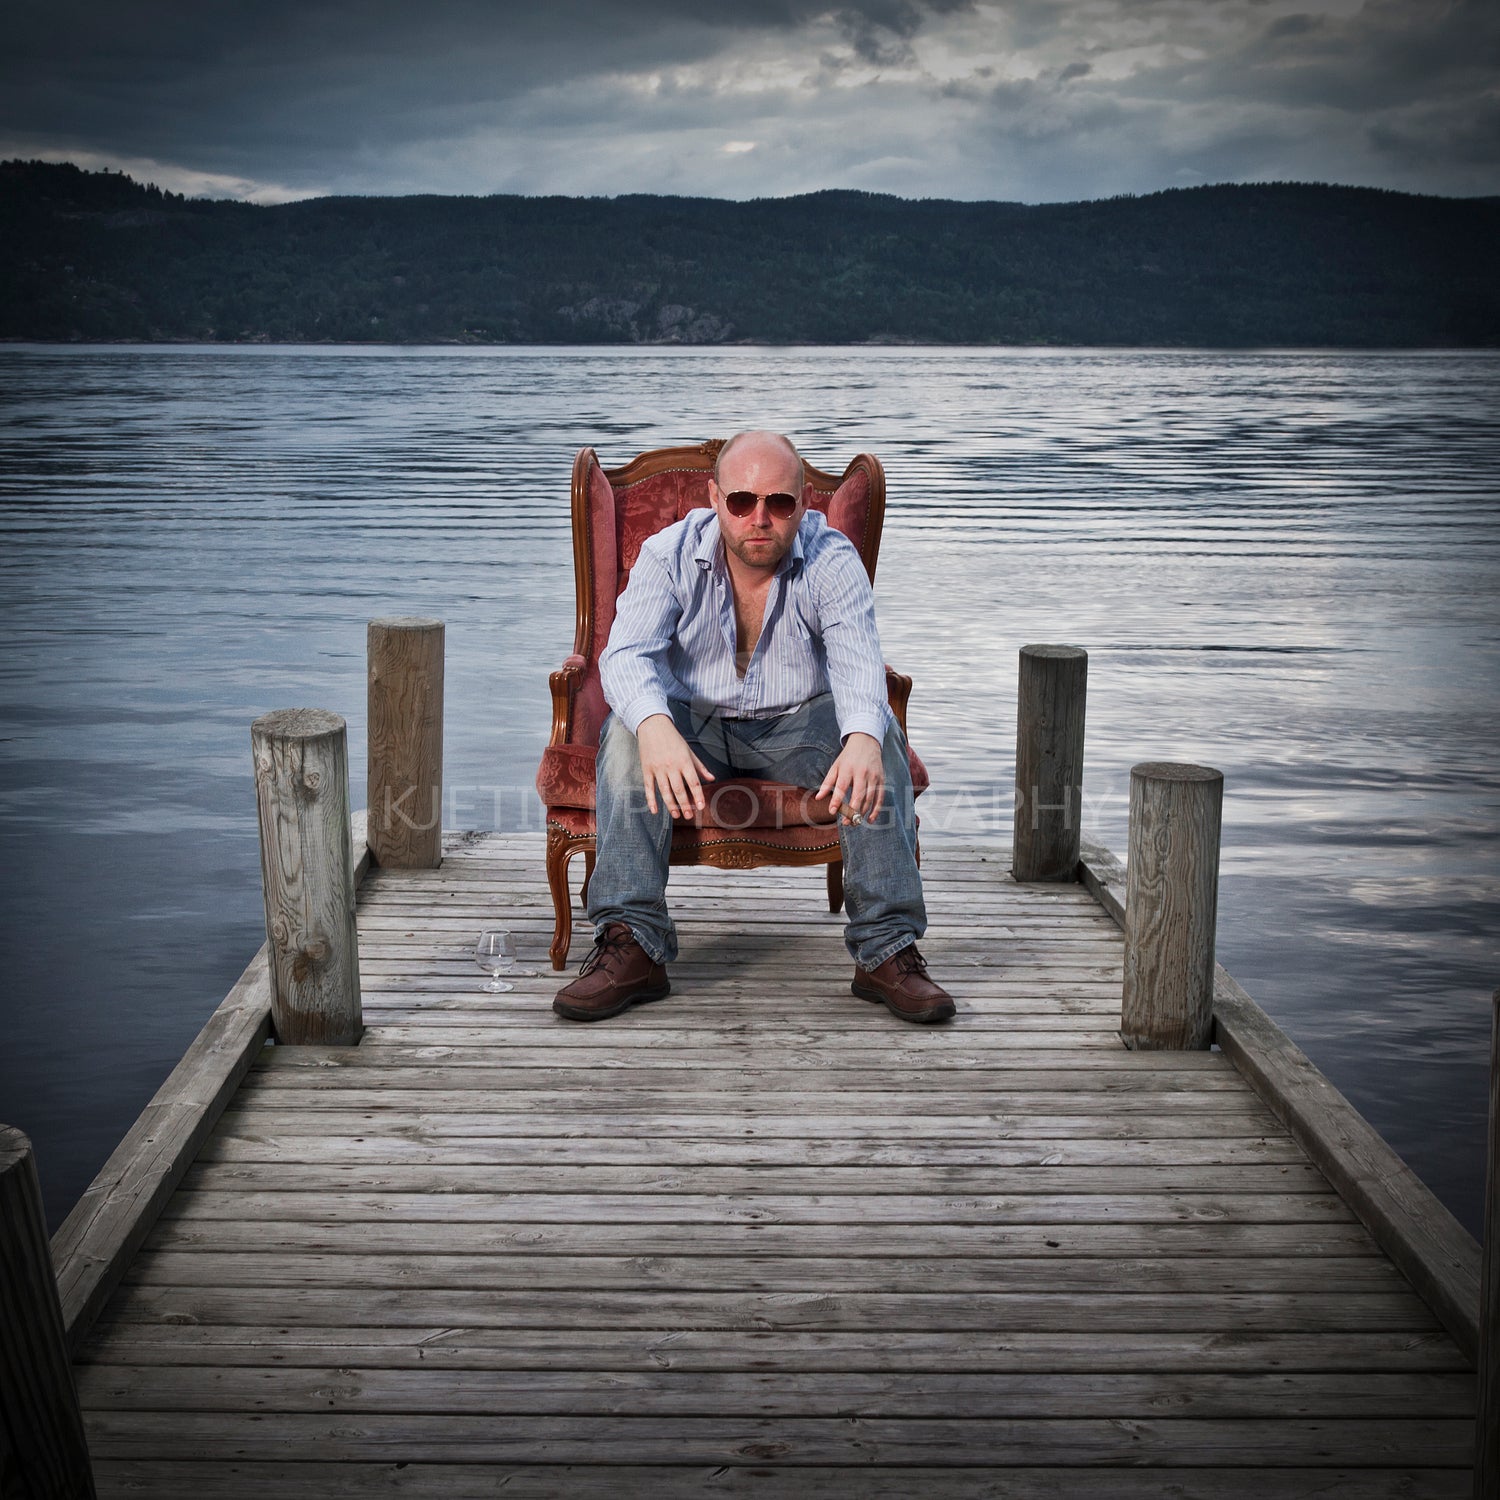 Man in Chair on a Pier